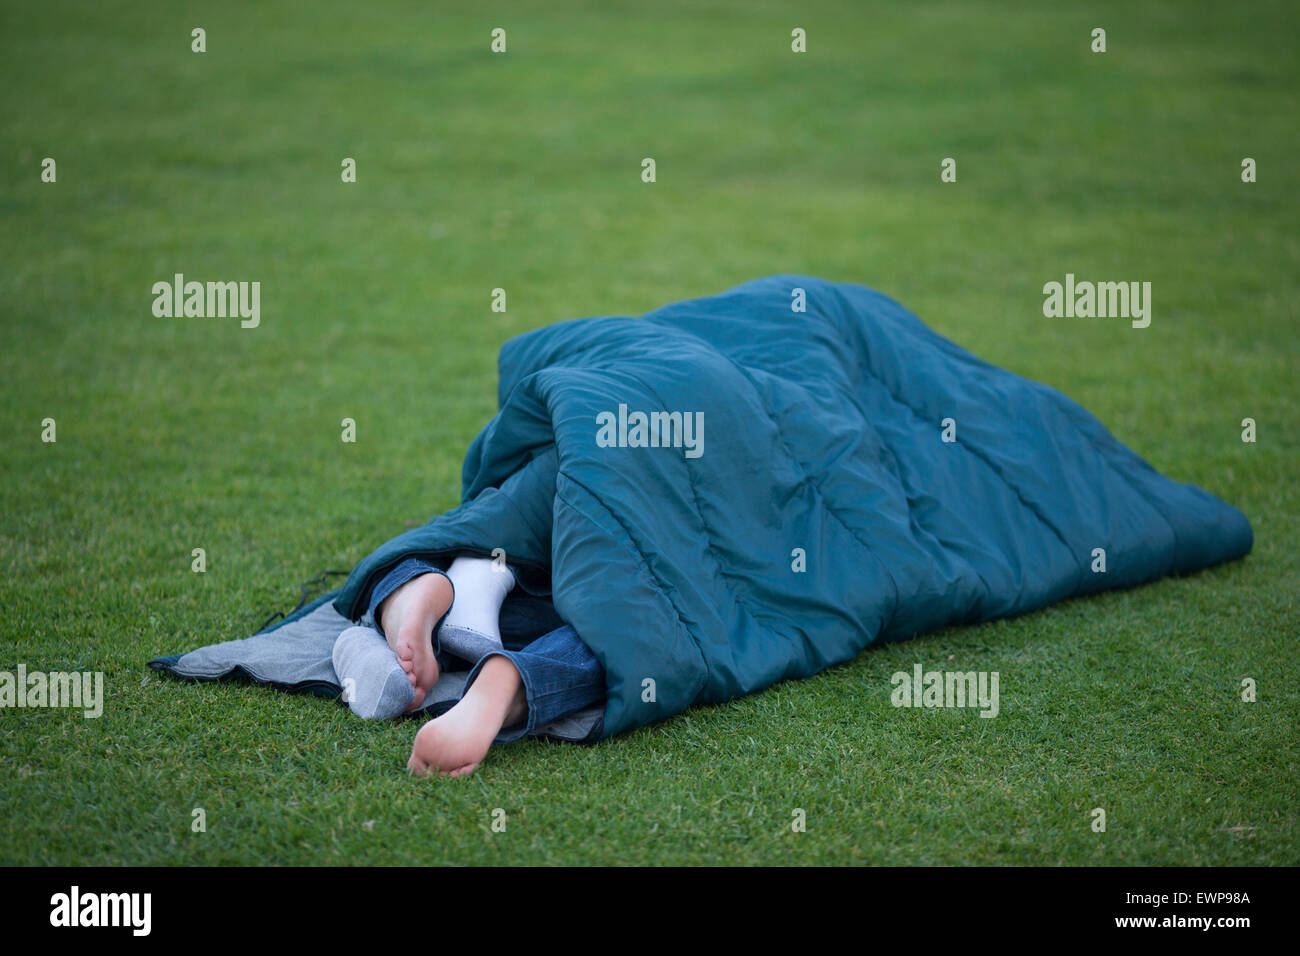 Two pairs of feet hanging out of sleeping bag. Stock Photo